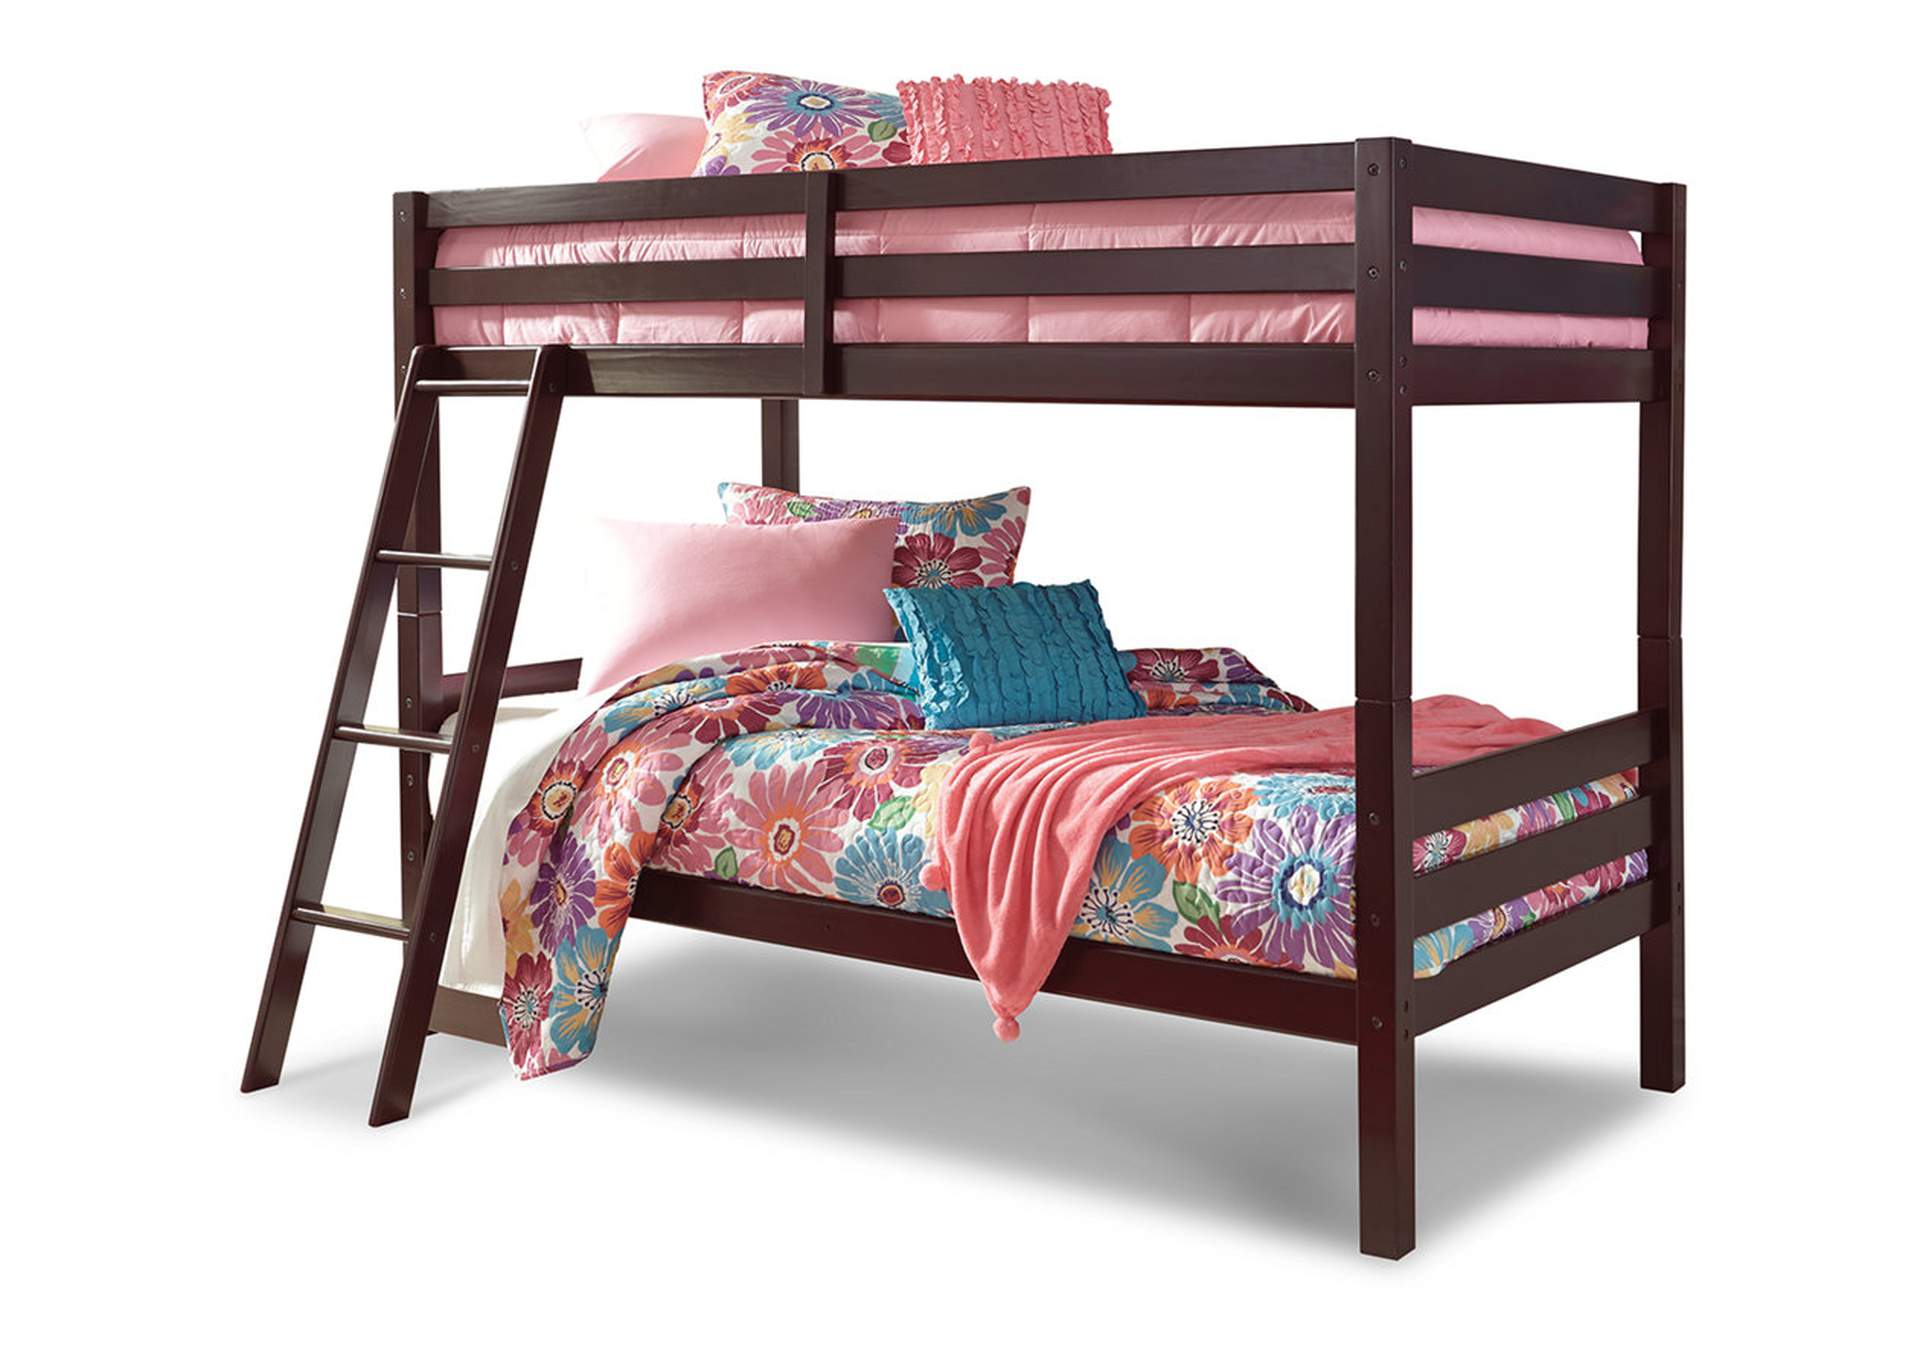 Halanton Twin over Twin Bunk Bed with Ladder,Direct To Consumer Express